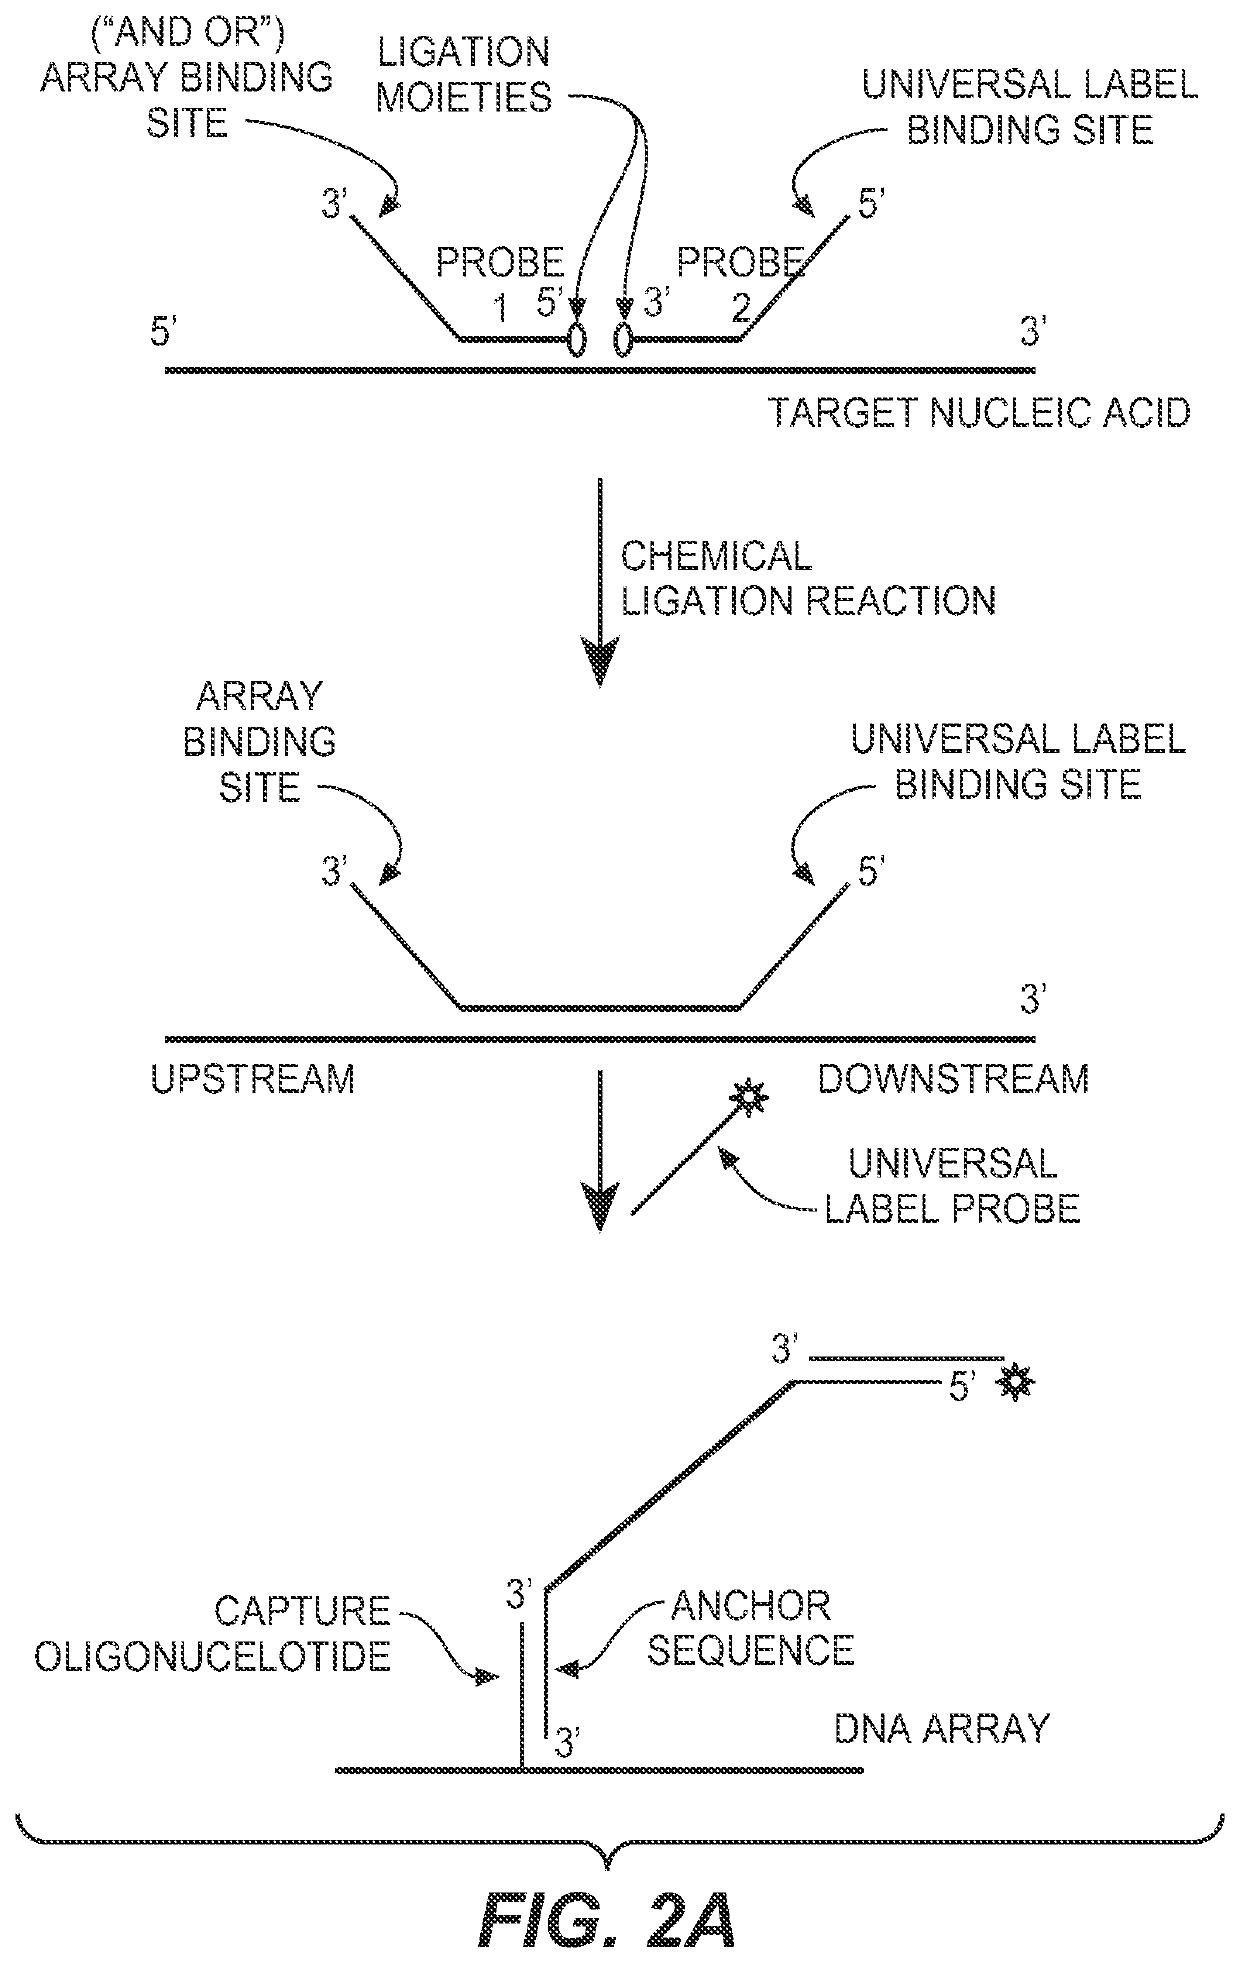 Detection of nucleic acid targets using chemically reactive oligonucleotide probes